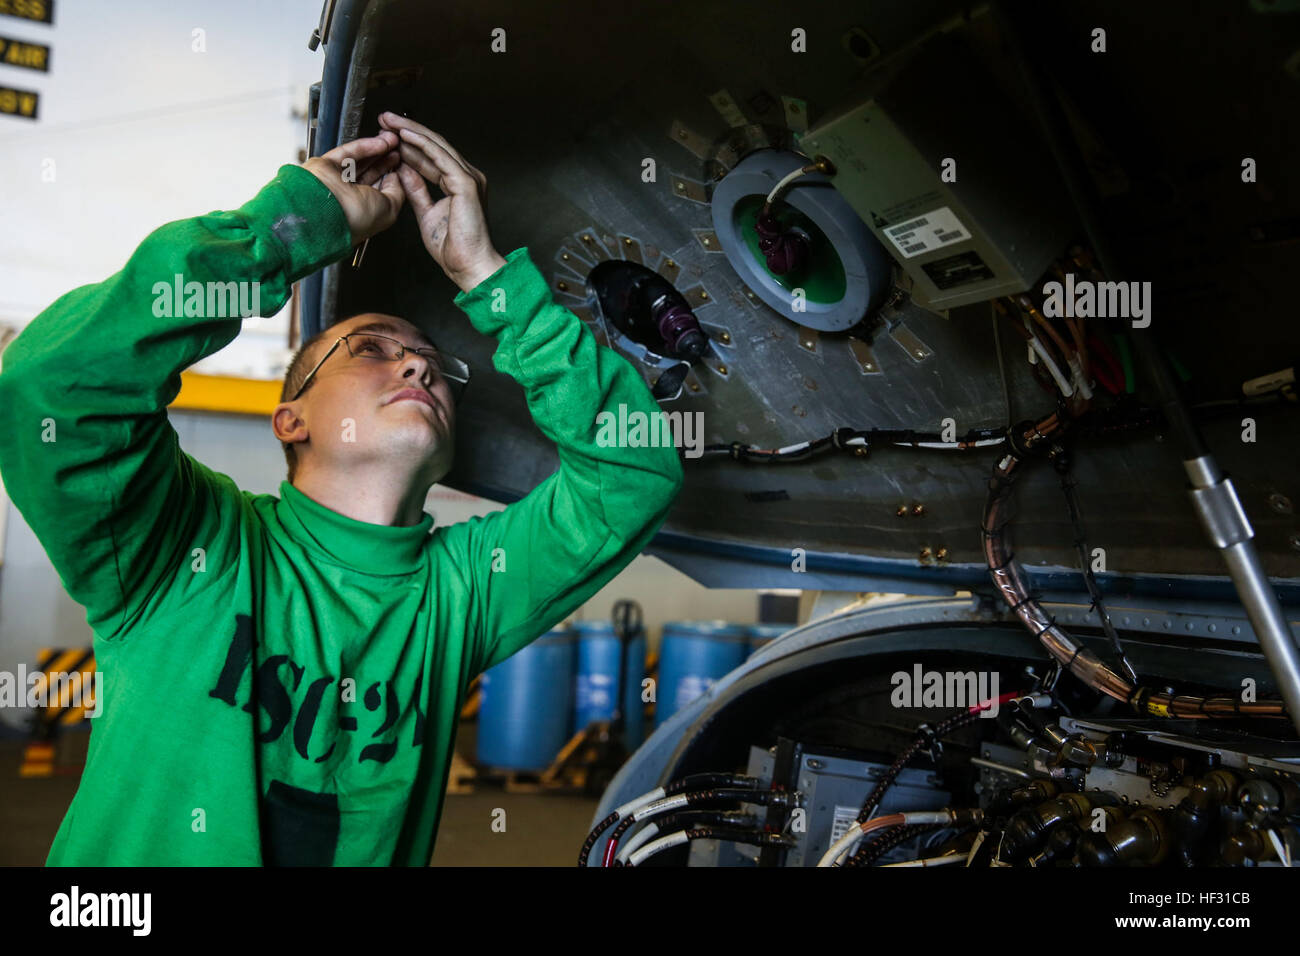 U.S. Navy Seaman Wesley Huddleston does daily maintenance on an MH-60S Seahawk aboard the USS Essex (LHD 2) during Amphibious Squadron/Marine Expeditionary Unit Integration Training (PMINT) off the coast of San Diego March 5, 2015. Huddleston is an aviation electrician’s mate with the Essex Amphibious Ready Group. Marines and Sailors work side-by-side to ensure their aircraft is in the best condition possible. (U.S. Marine Corps photo by Cpl. Anna Albrecht/Released) USS Essex, Maintenance at sea 150305-M-SV584-003 Stock Photo